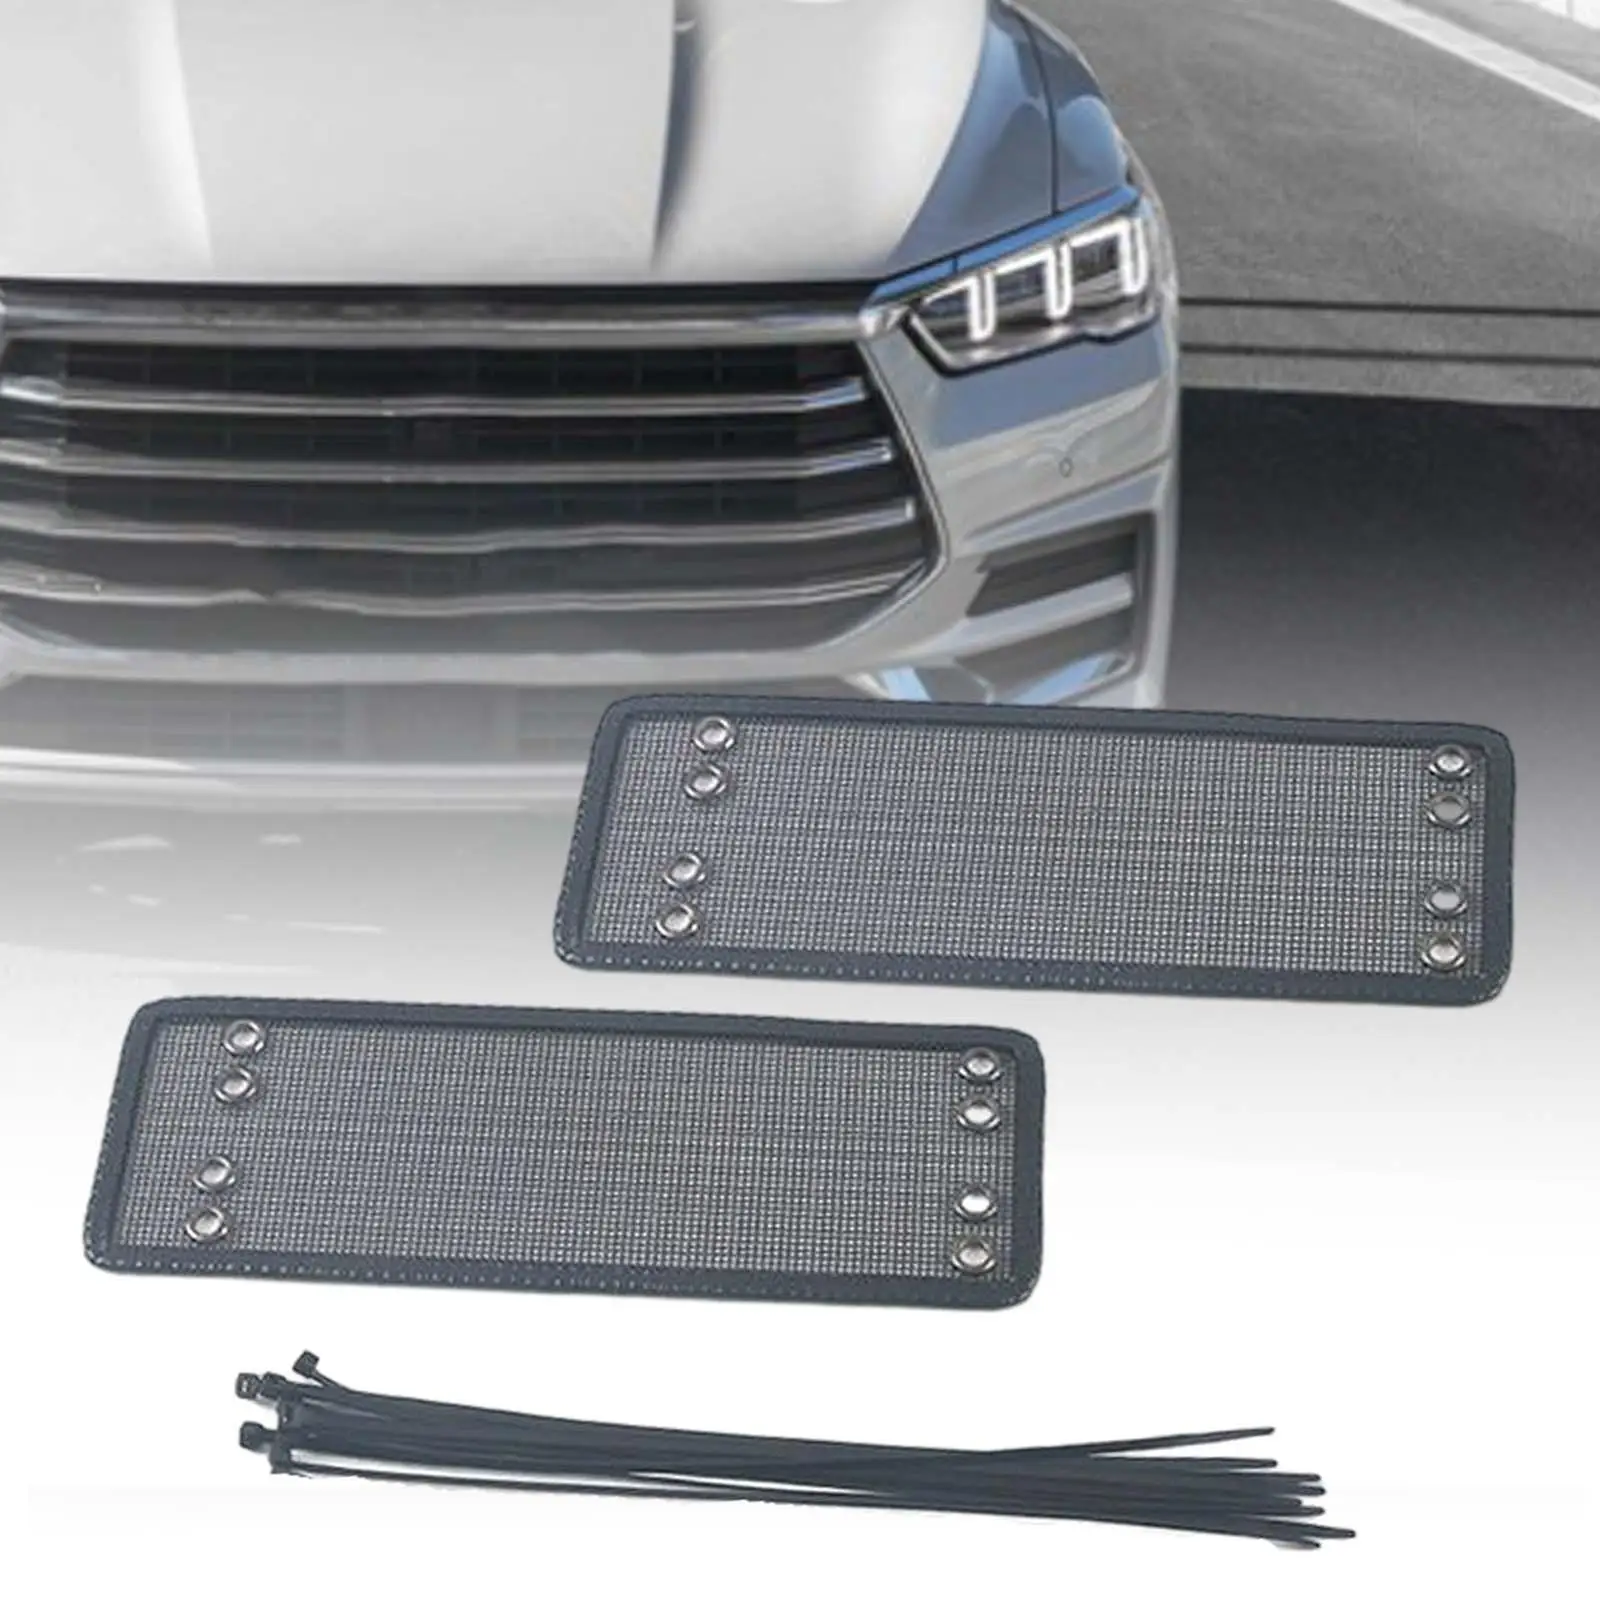 Front Grille Mesh Car Accessories for Byd Atto 3 21 Premium Spare Parts Replaces Durable